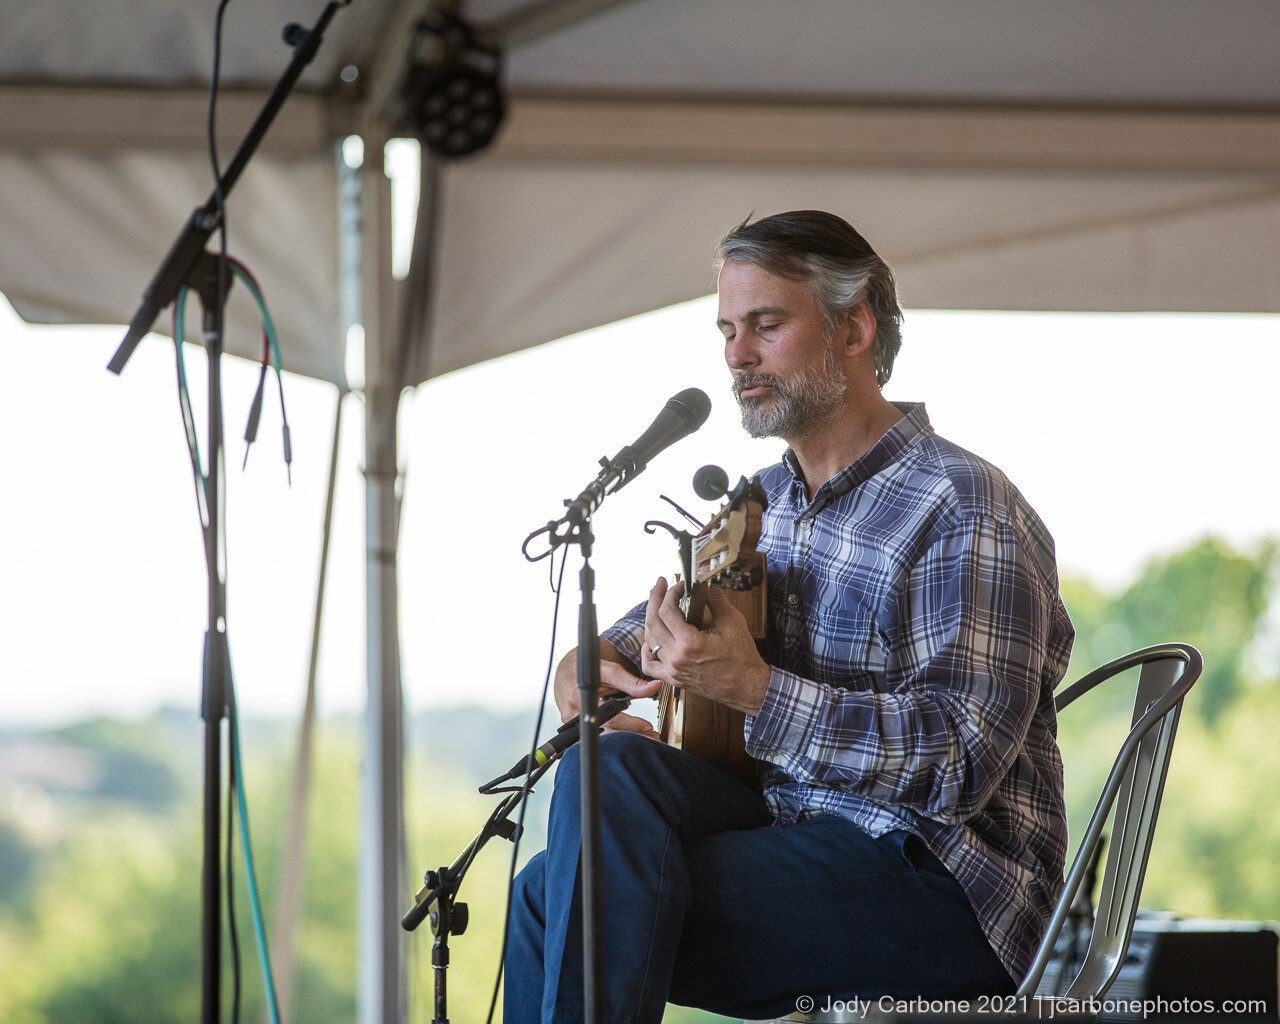 Andrew Winn opens for Everything band at The Festy Chisholm Vineyards